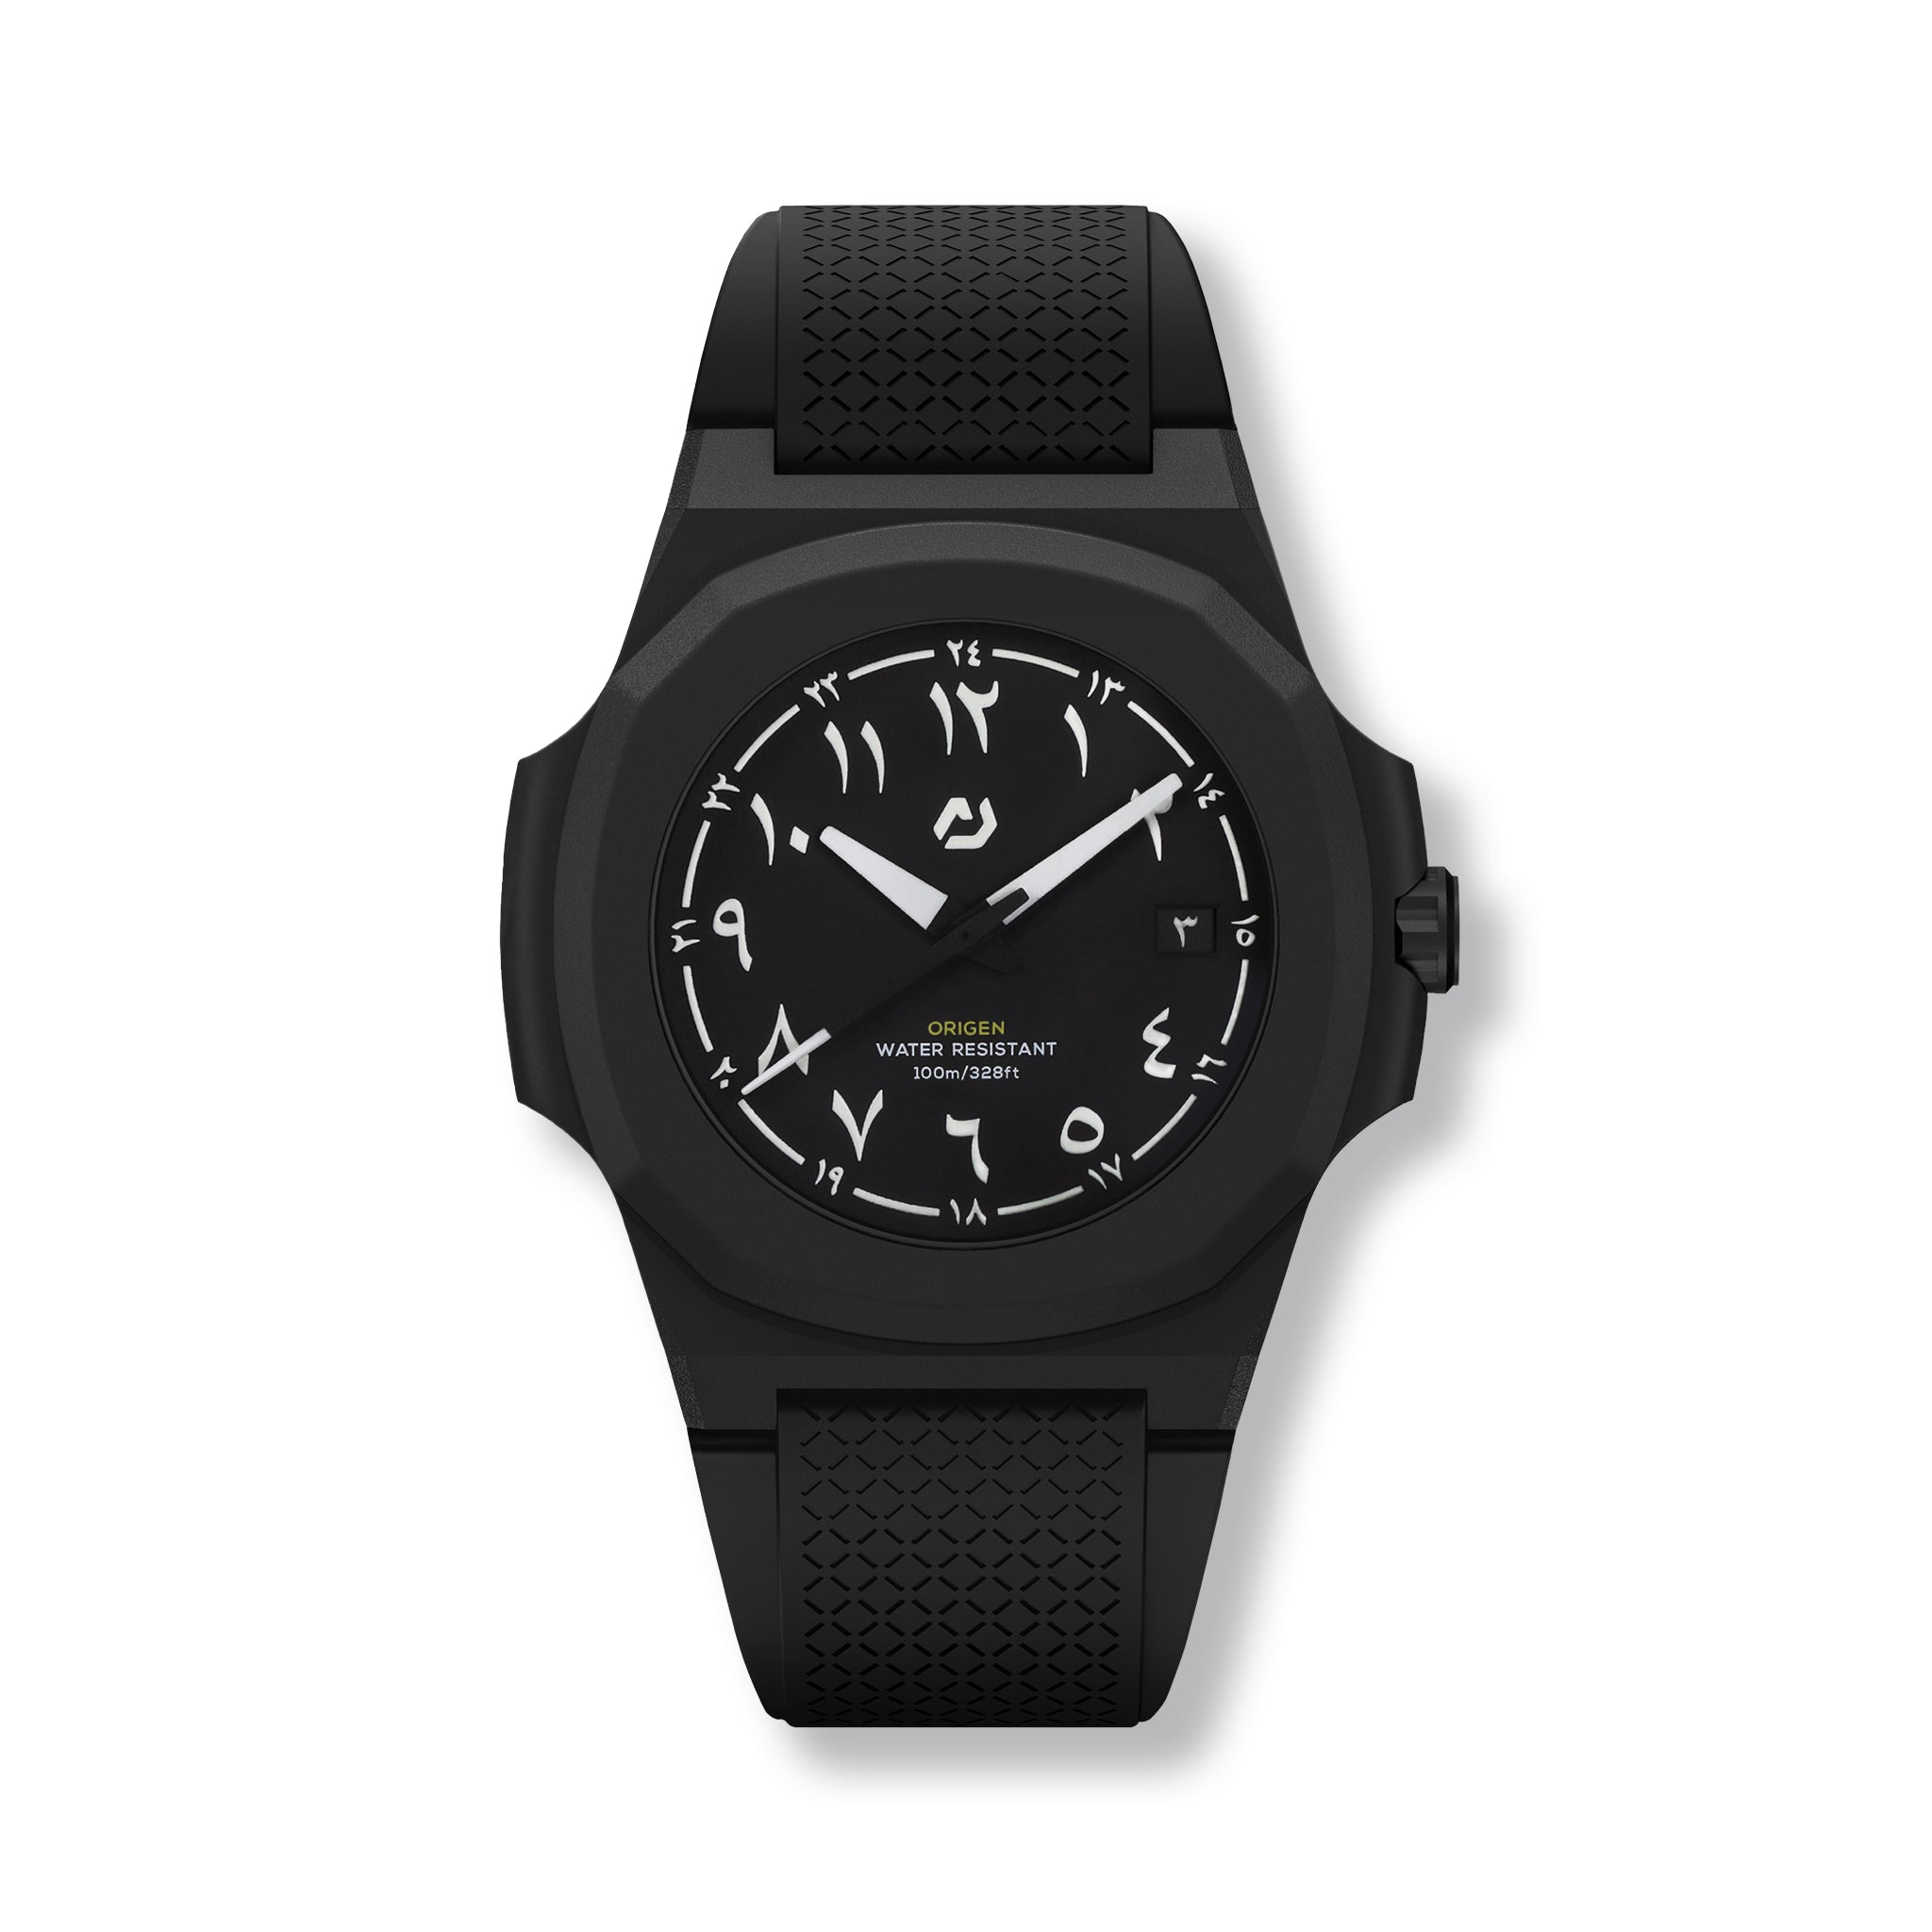 Nuun Official Watches